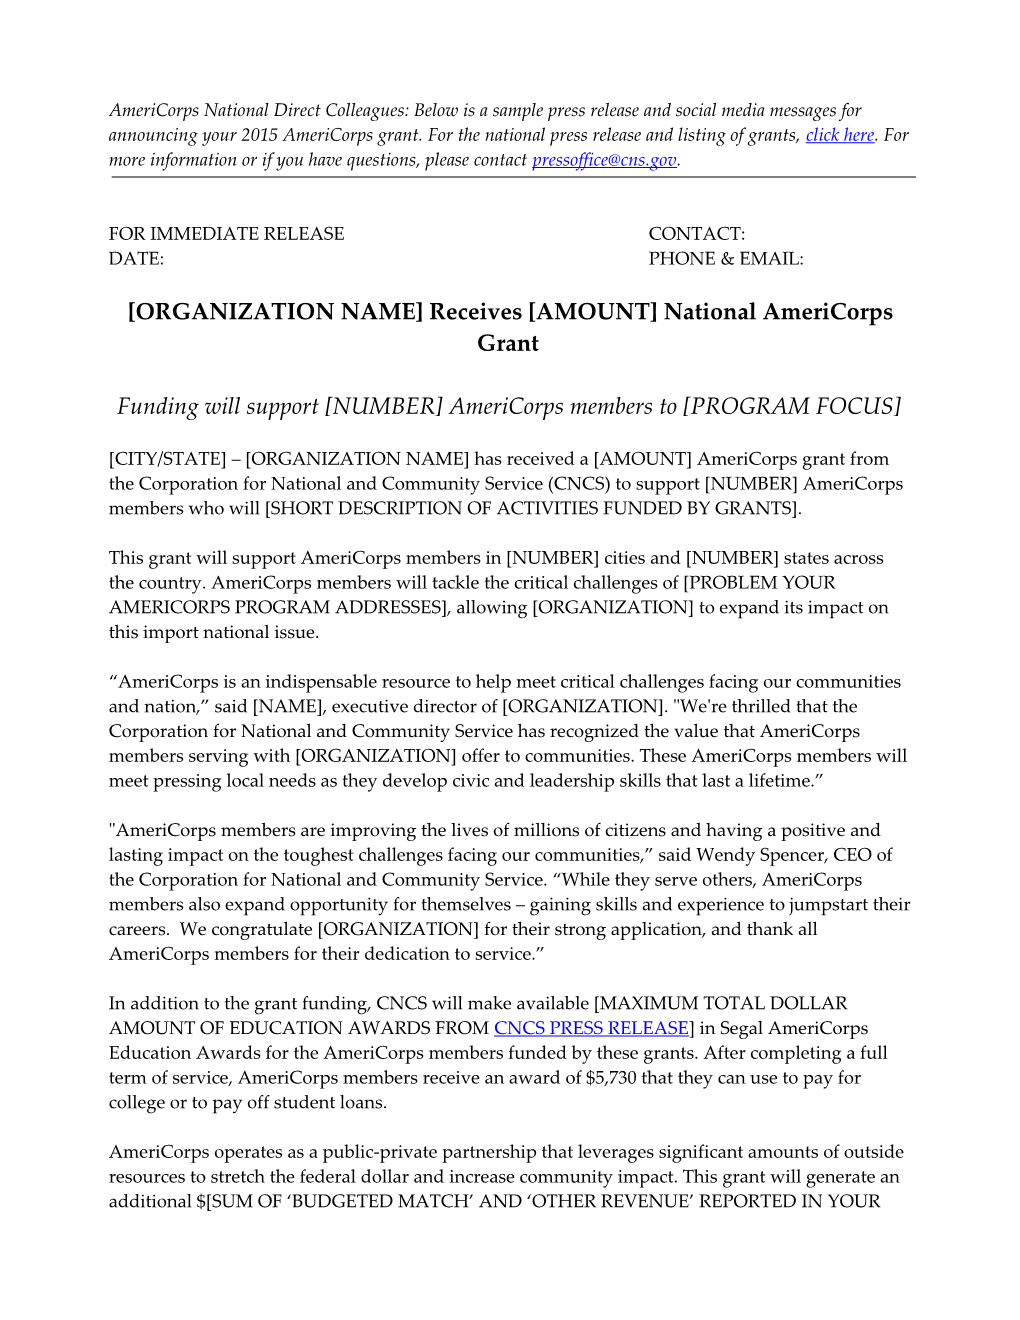 NOTE to PRESS SECRETARY: Below Is a Sample Press Release Announcing a Fiscal 2009 Americorps